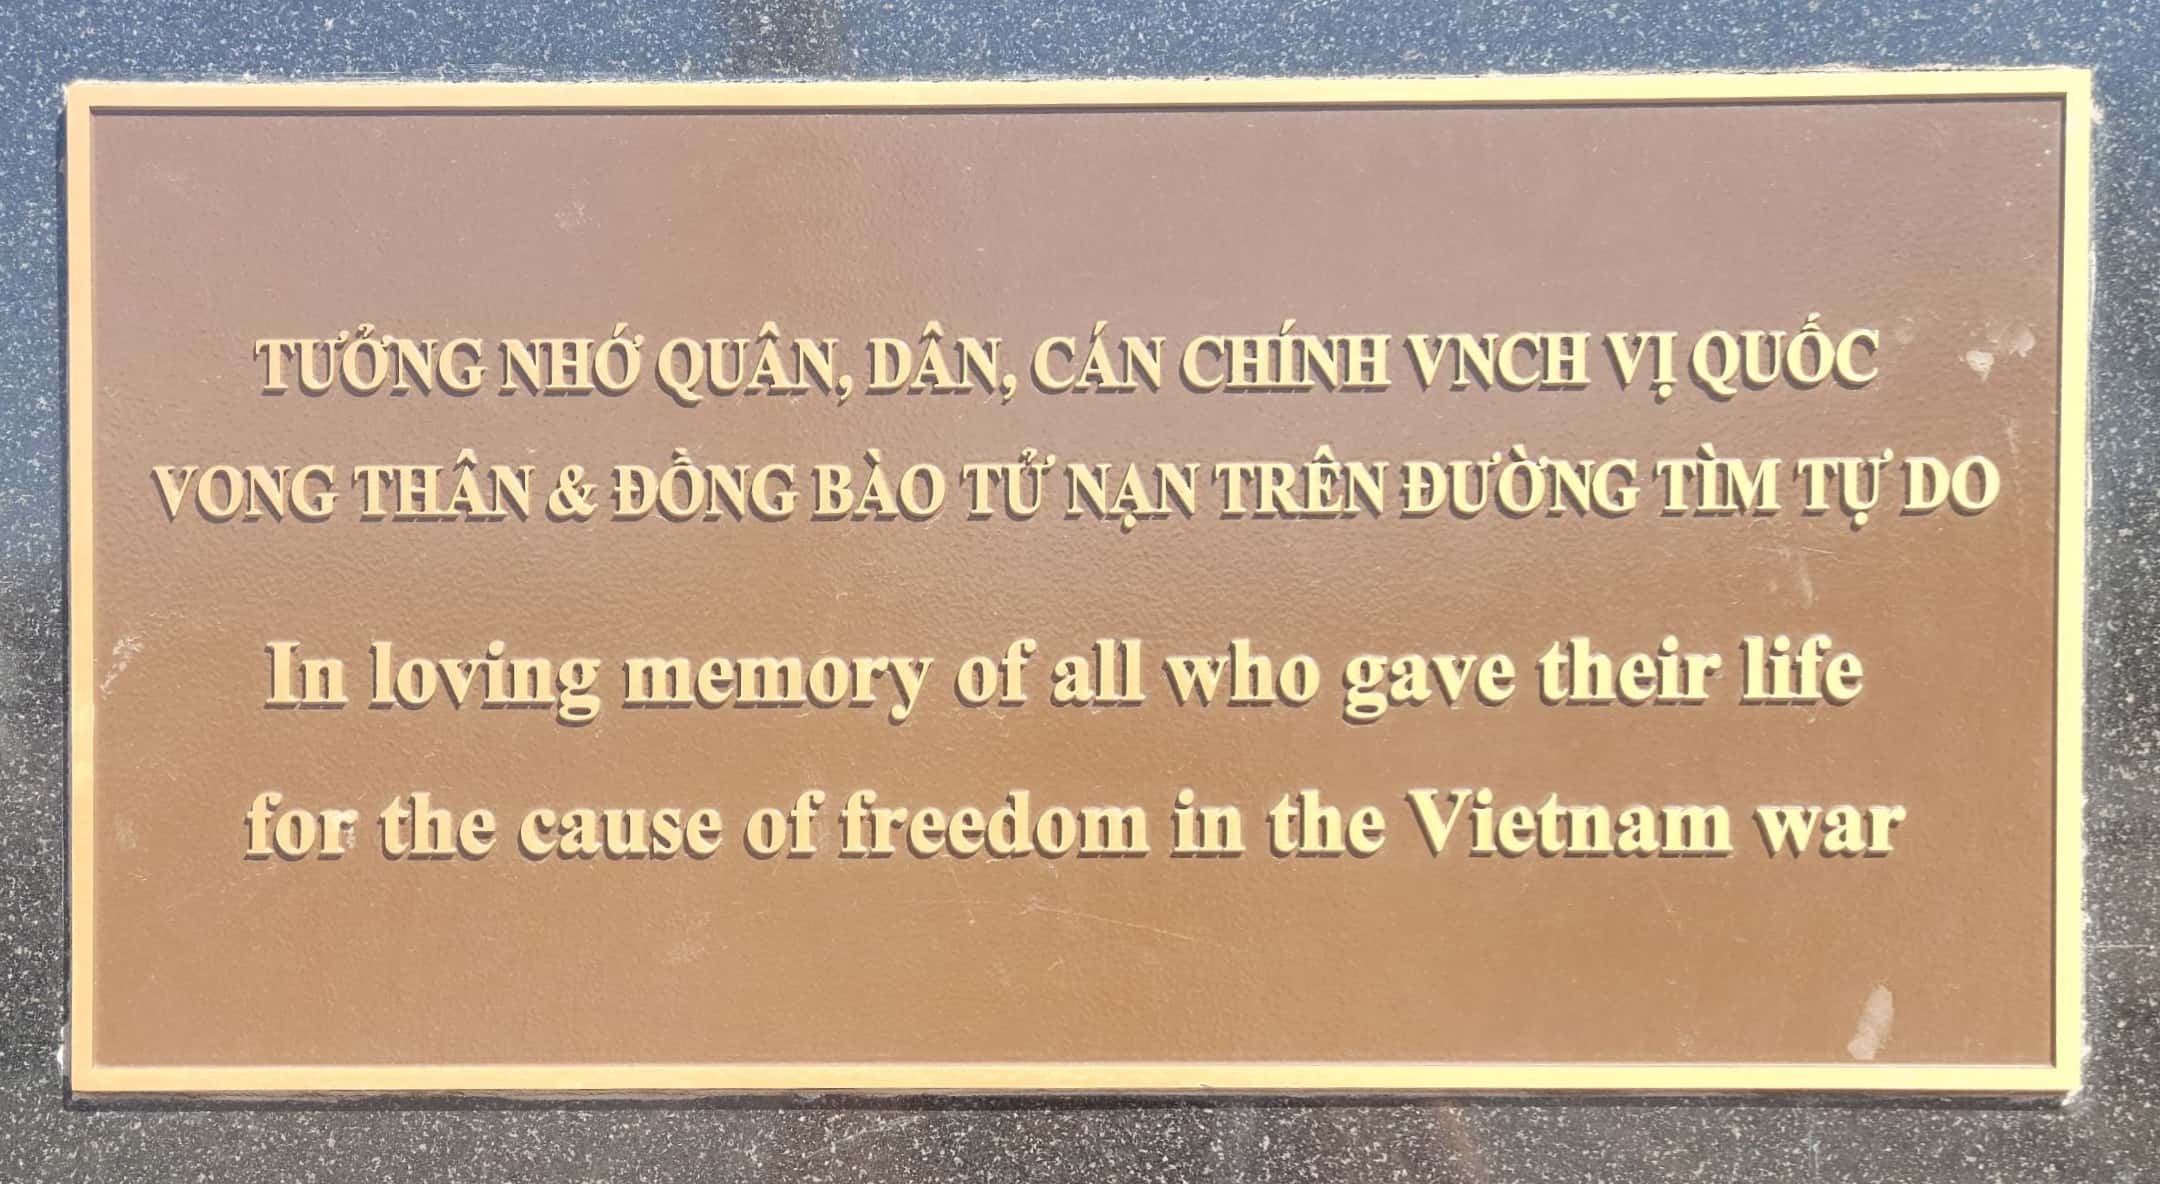 The Vietnam Memorial Plaque reads: "In loving memory of all who gave their life for the cause of freedom in the Vietnam war."